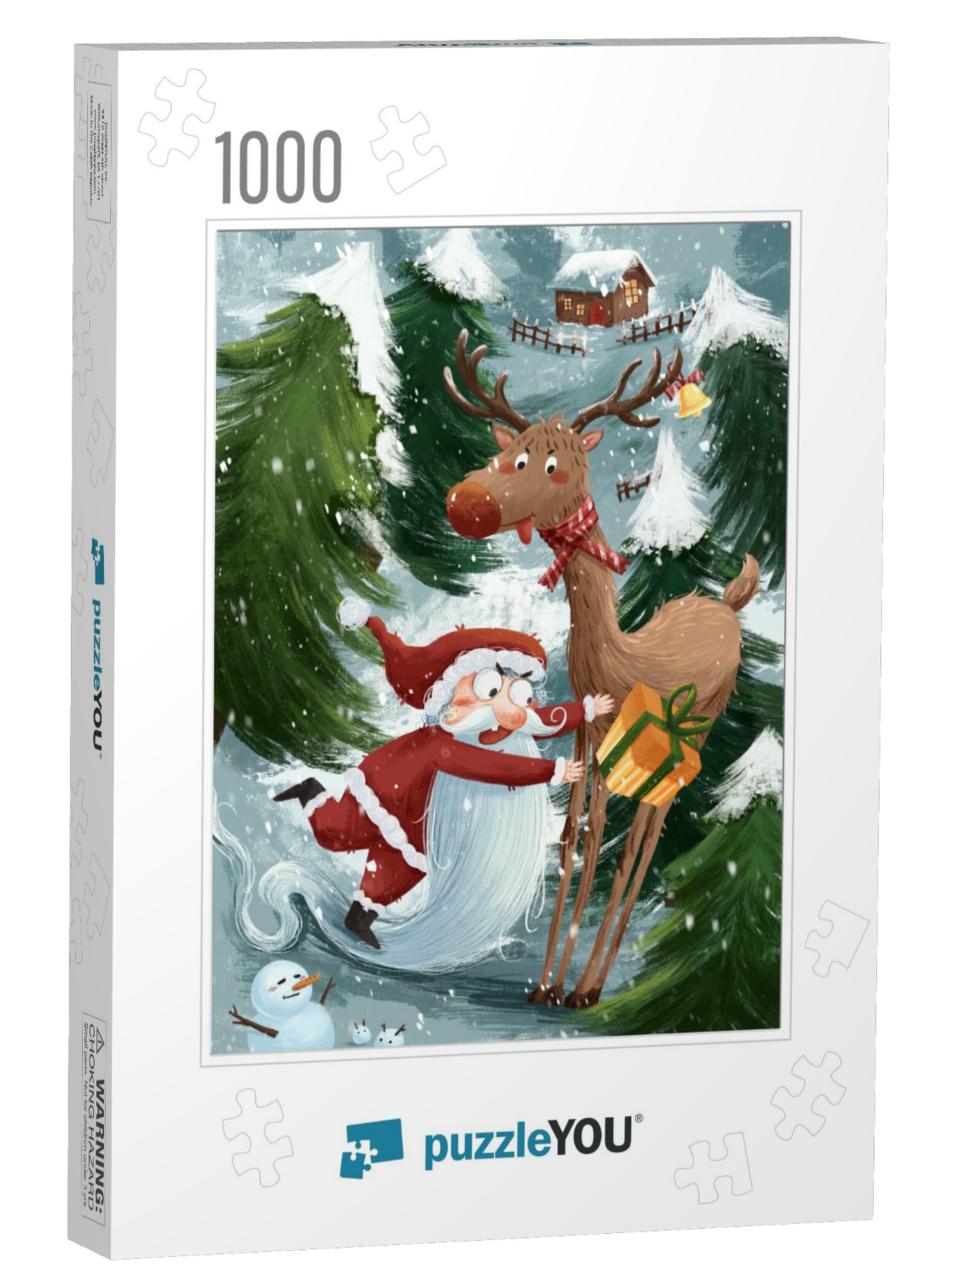 Funny Christmas Illustration Including Santa Claus & Reindeer... Jigsaw Puzzle with 1000 pieces